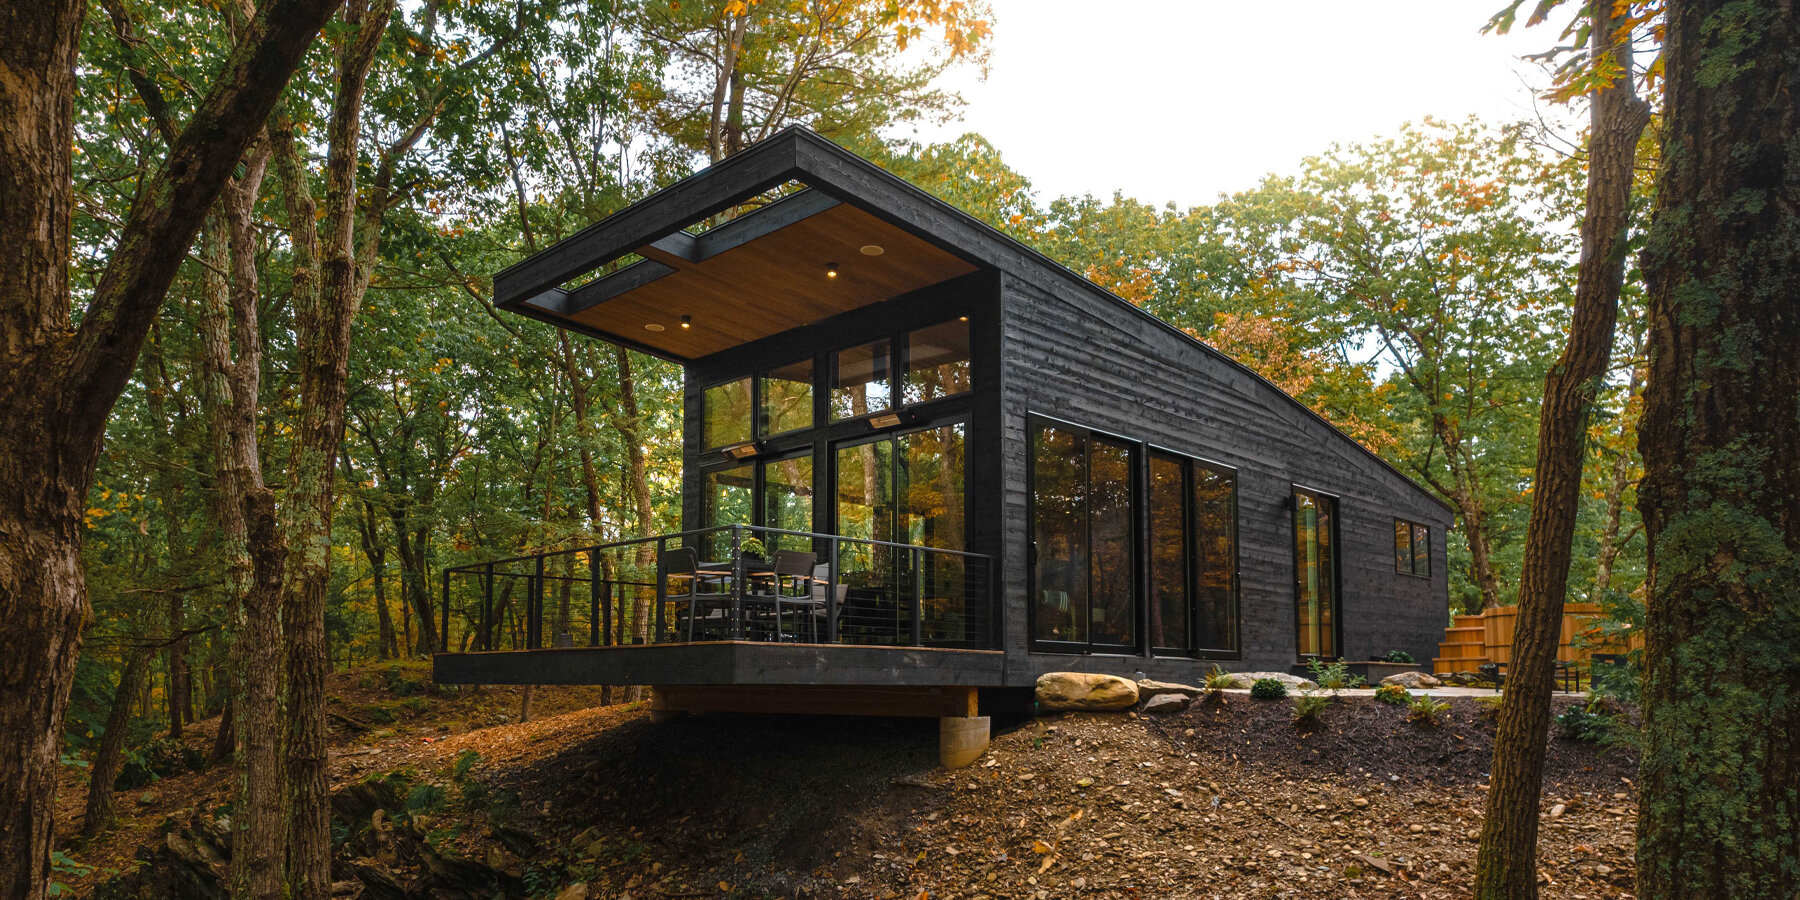 'cabana' is a cantilevered, modernist retreat perched on a forest cliff in rhinebeck, NY